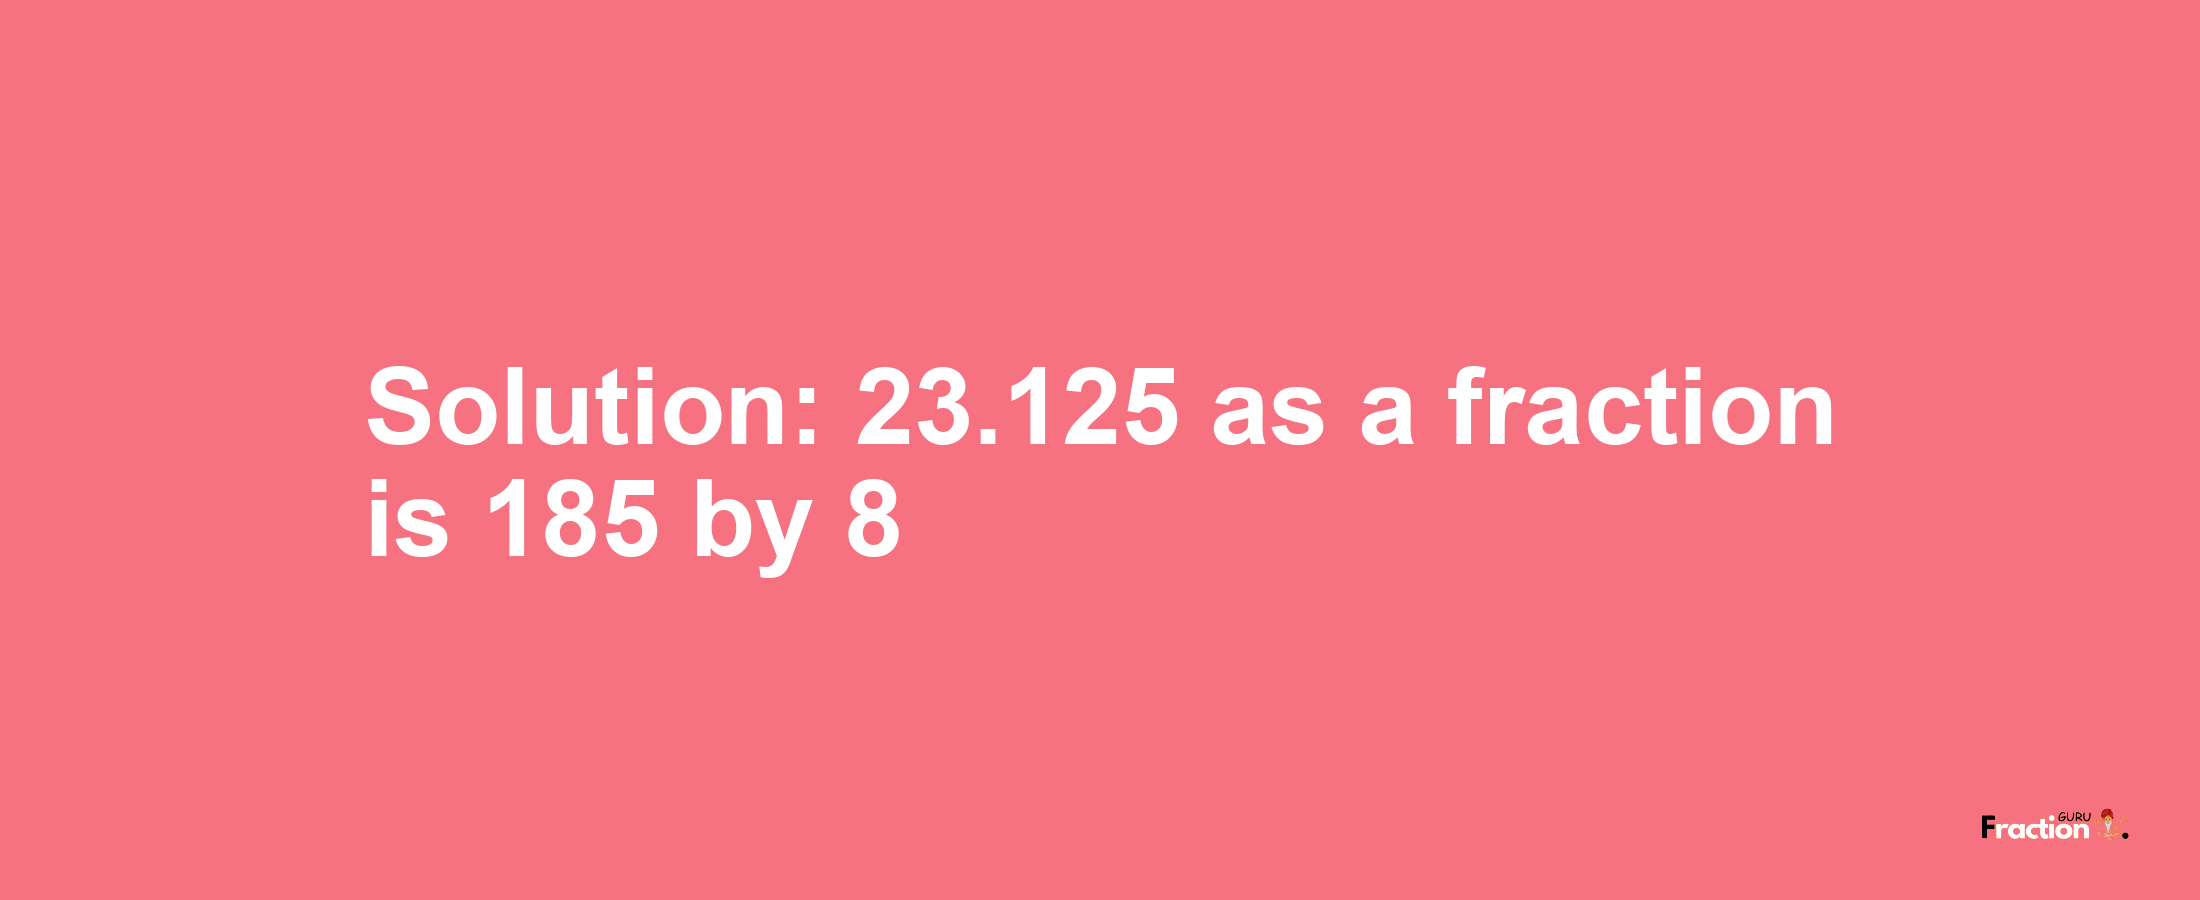 Solution:23.125 as a fraction is 185/8